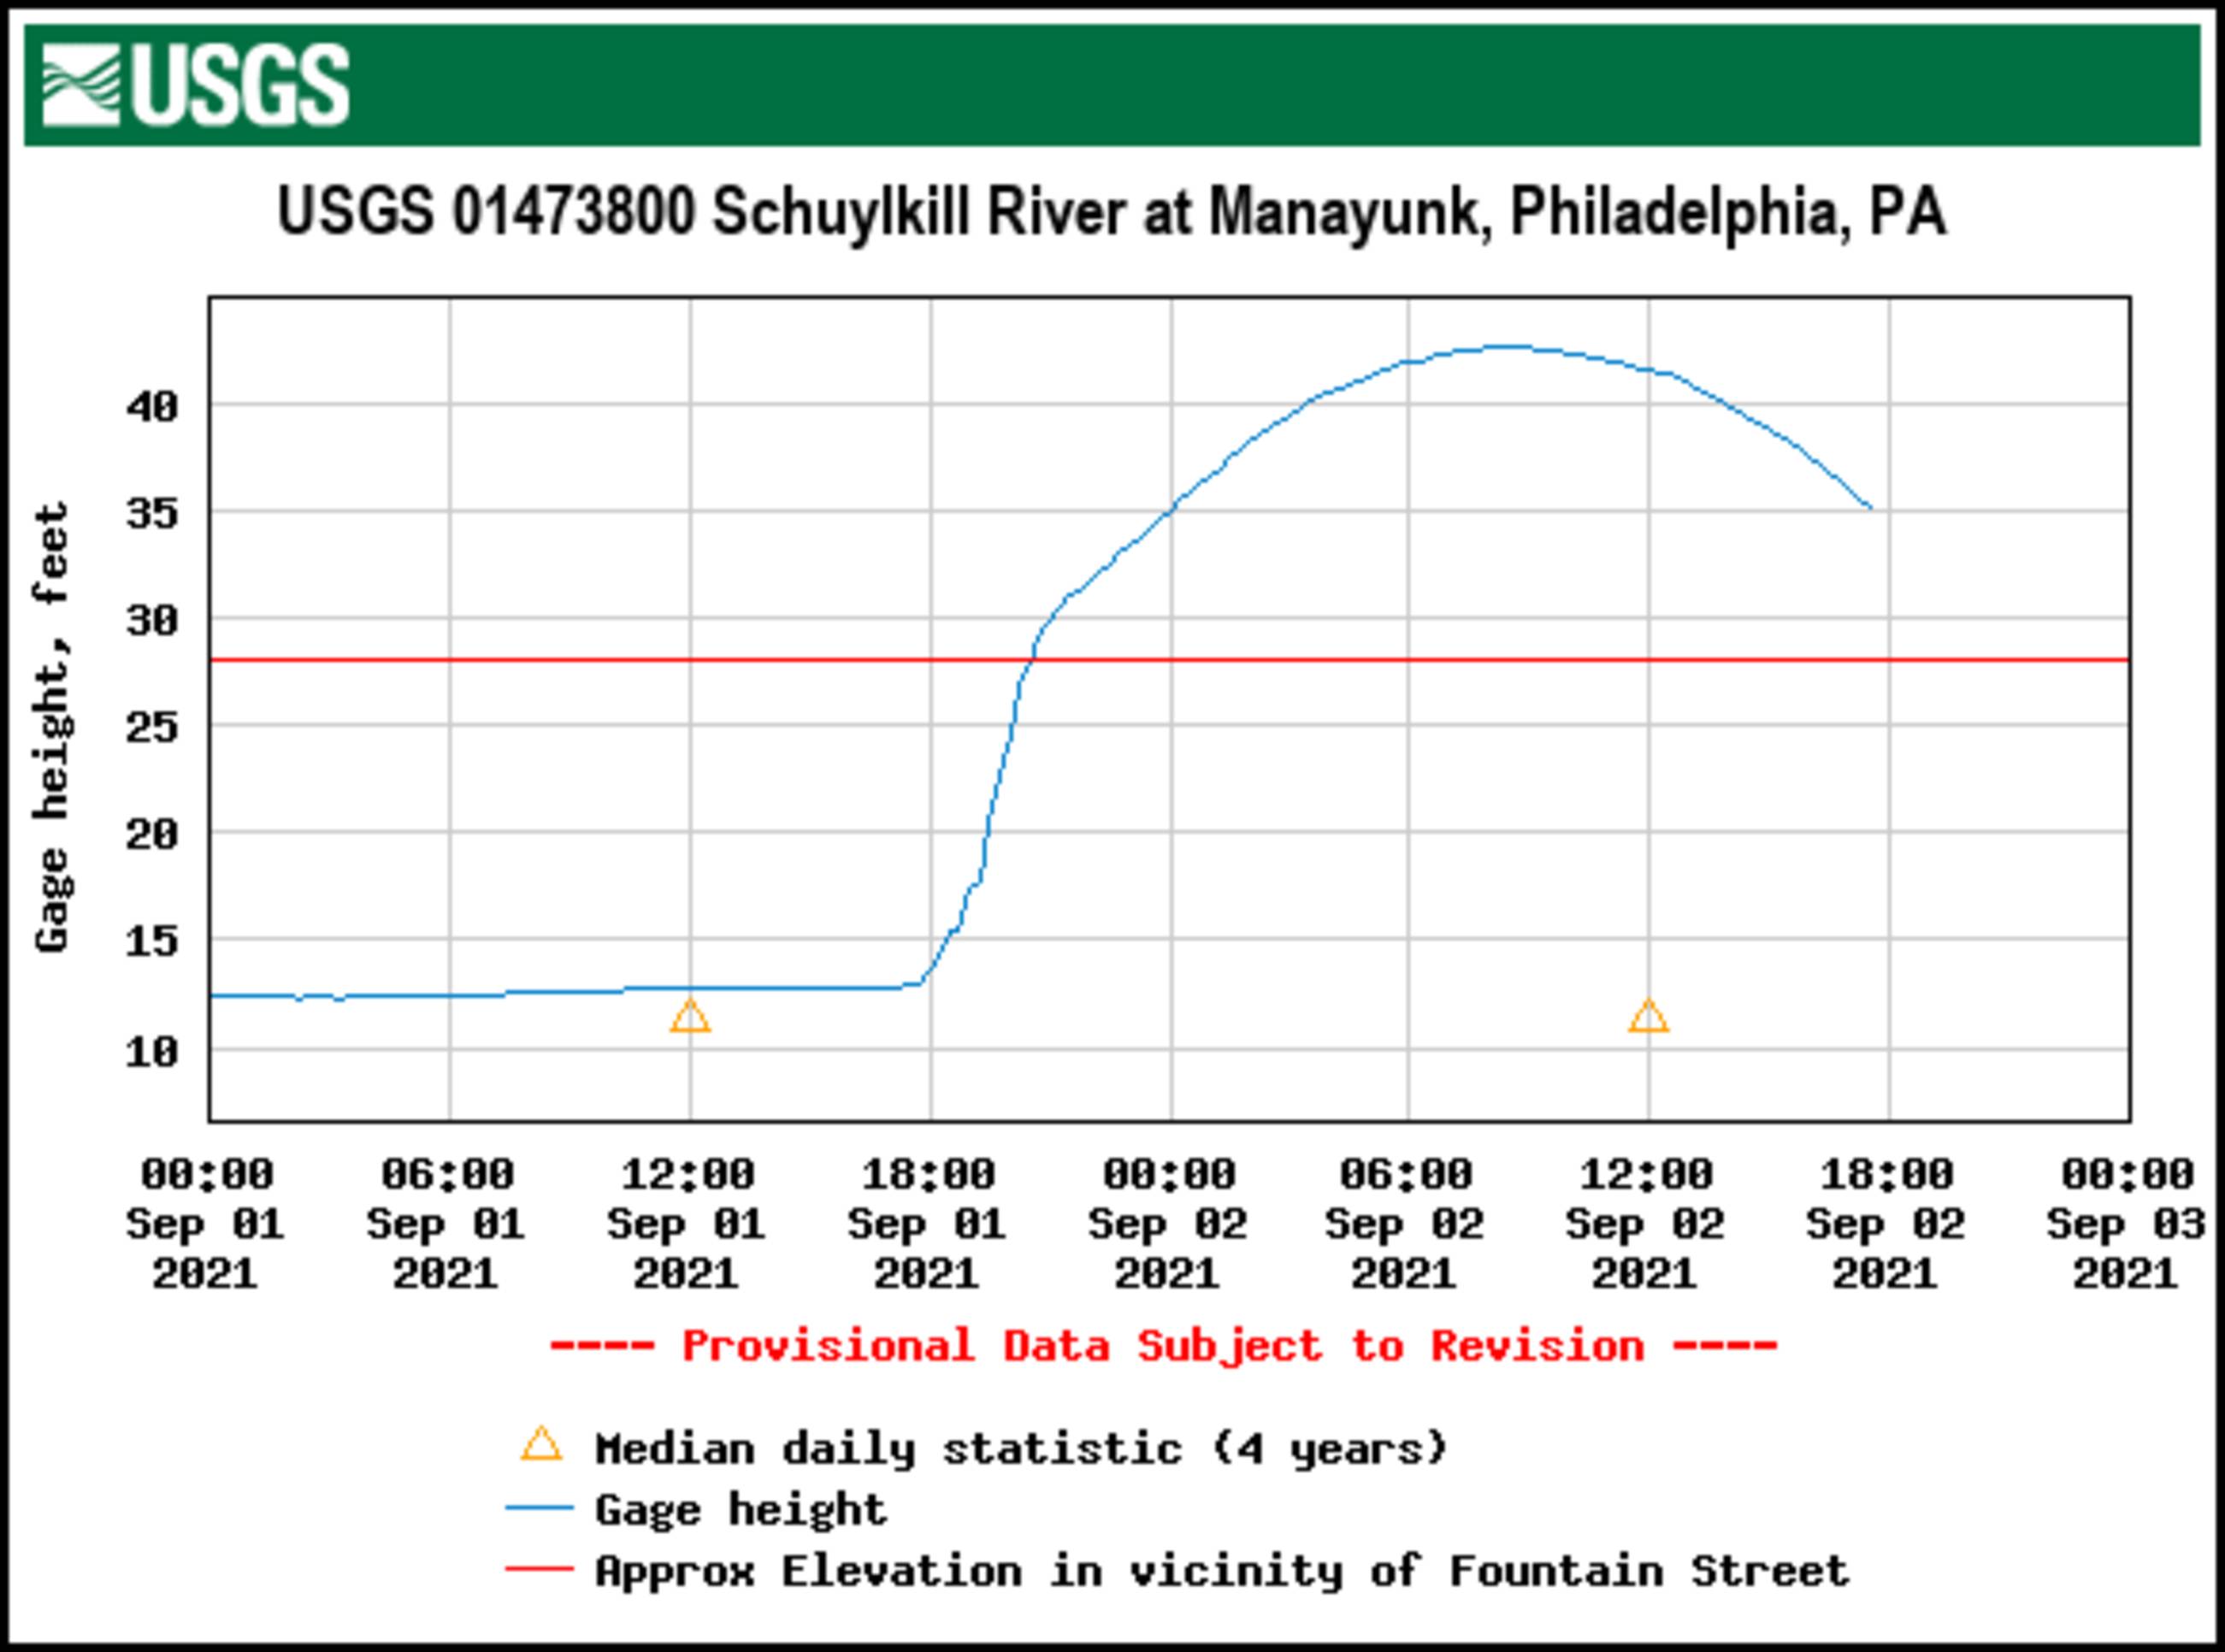 USGS flood level graph from the measuring station on Green Lane bridge. Peaked at 42.69 feet at 8:15am. The gage is only a few years old so we don't have historical river crest data.